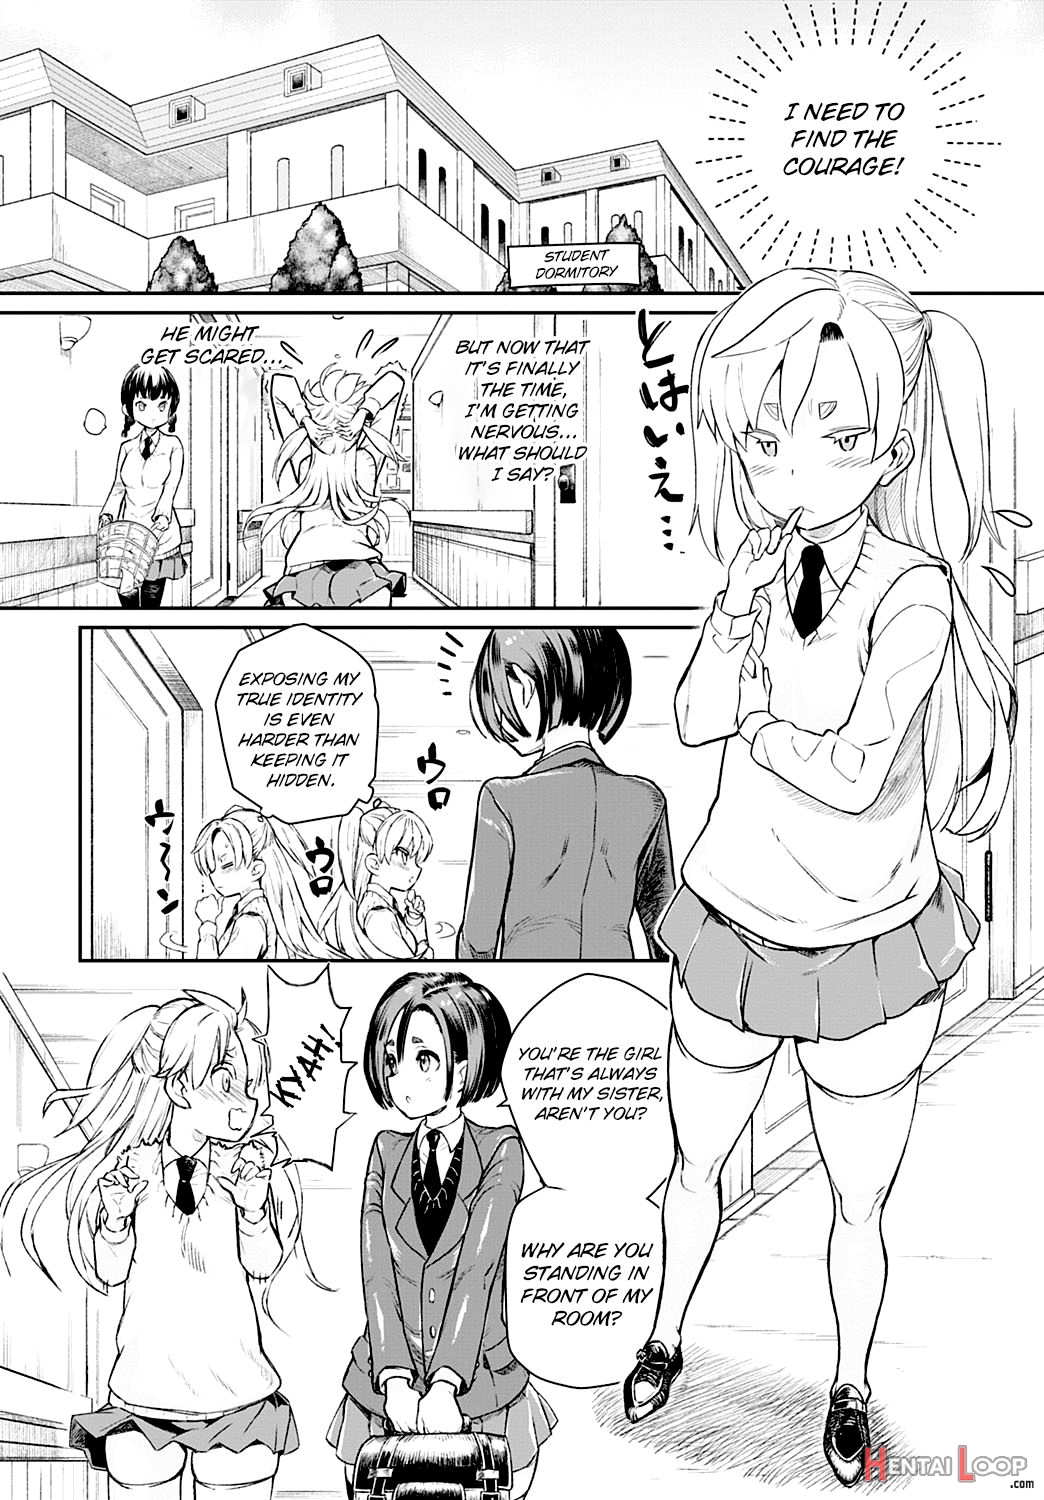 The Student Council President’s Secret 8 page 4